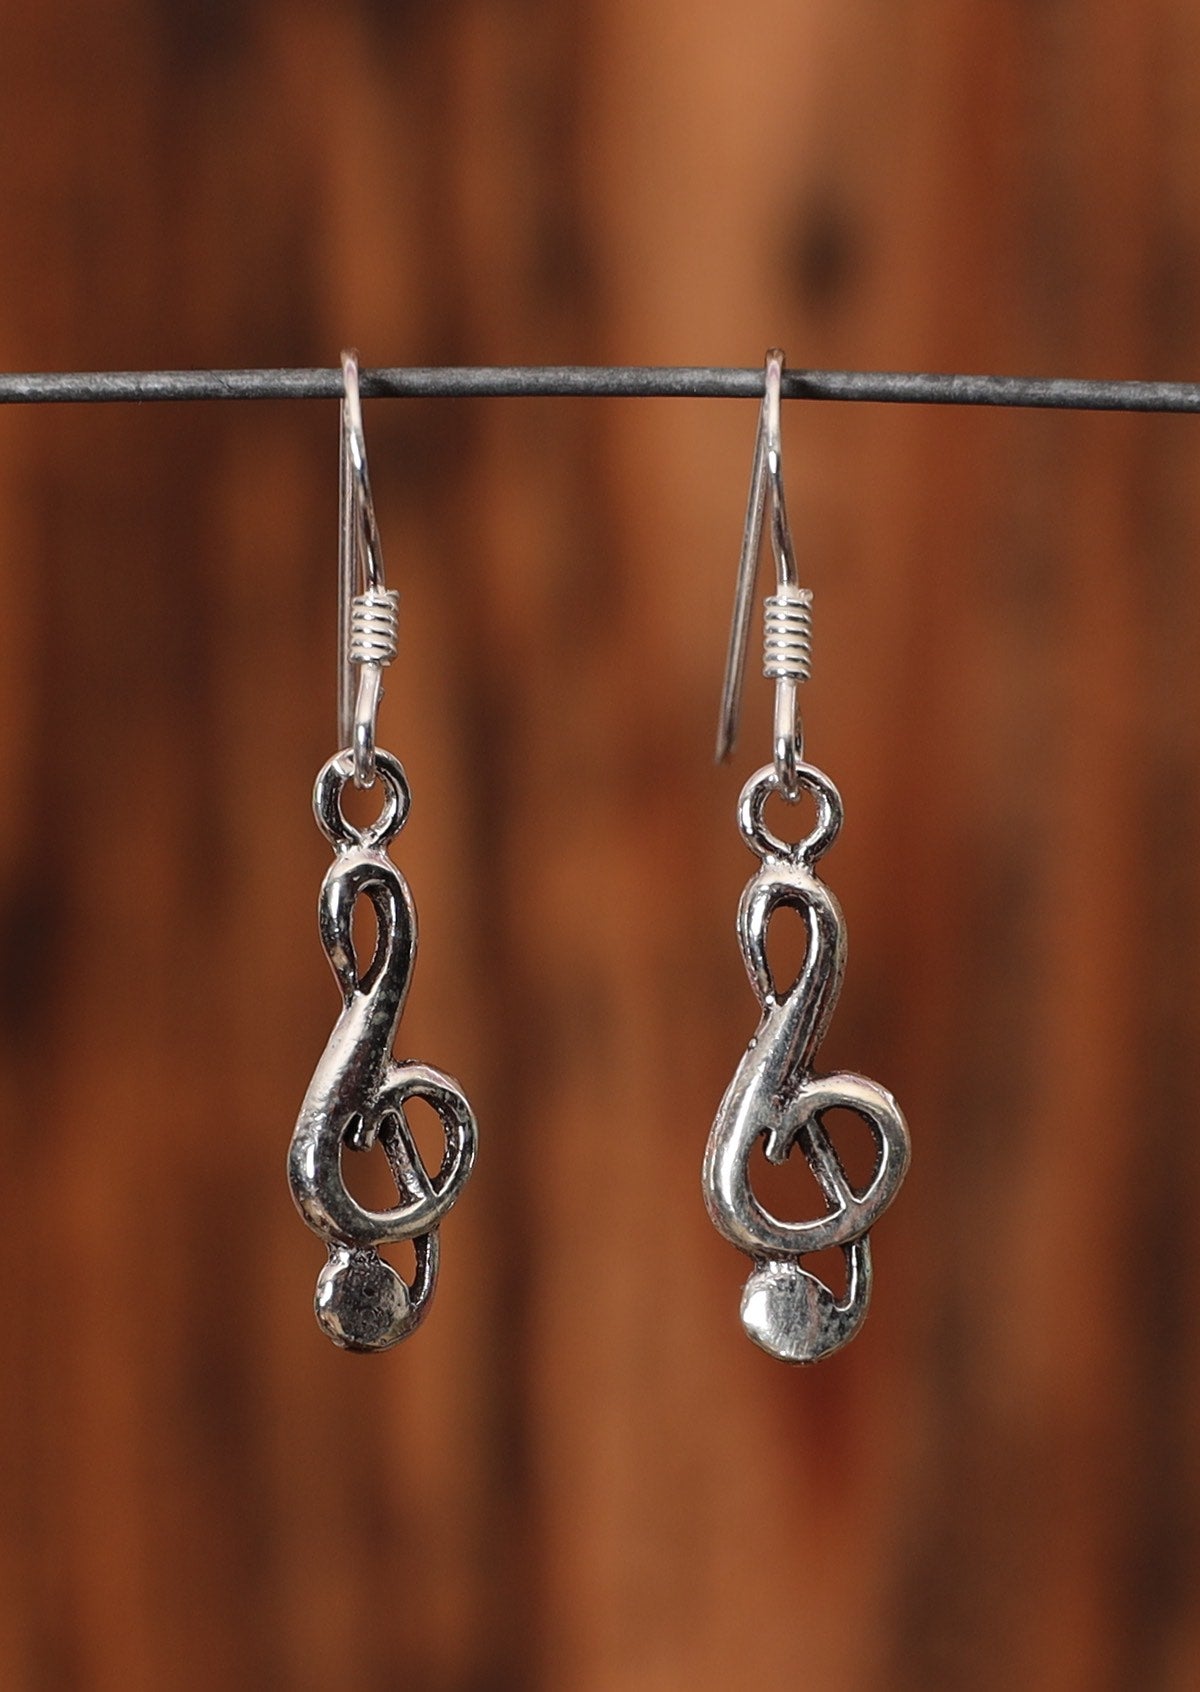 9.25% silver treble clef earrings on a wire for display. 